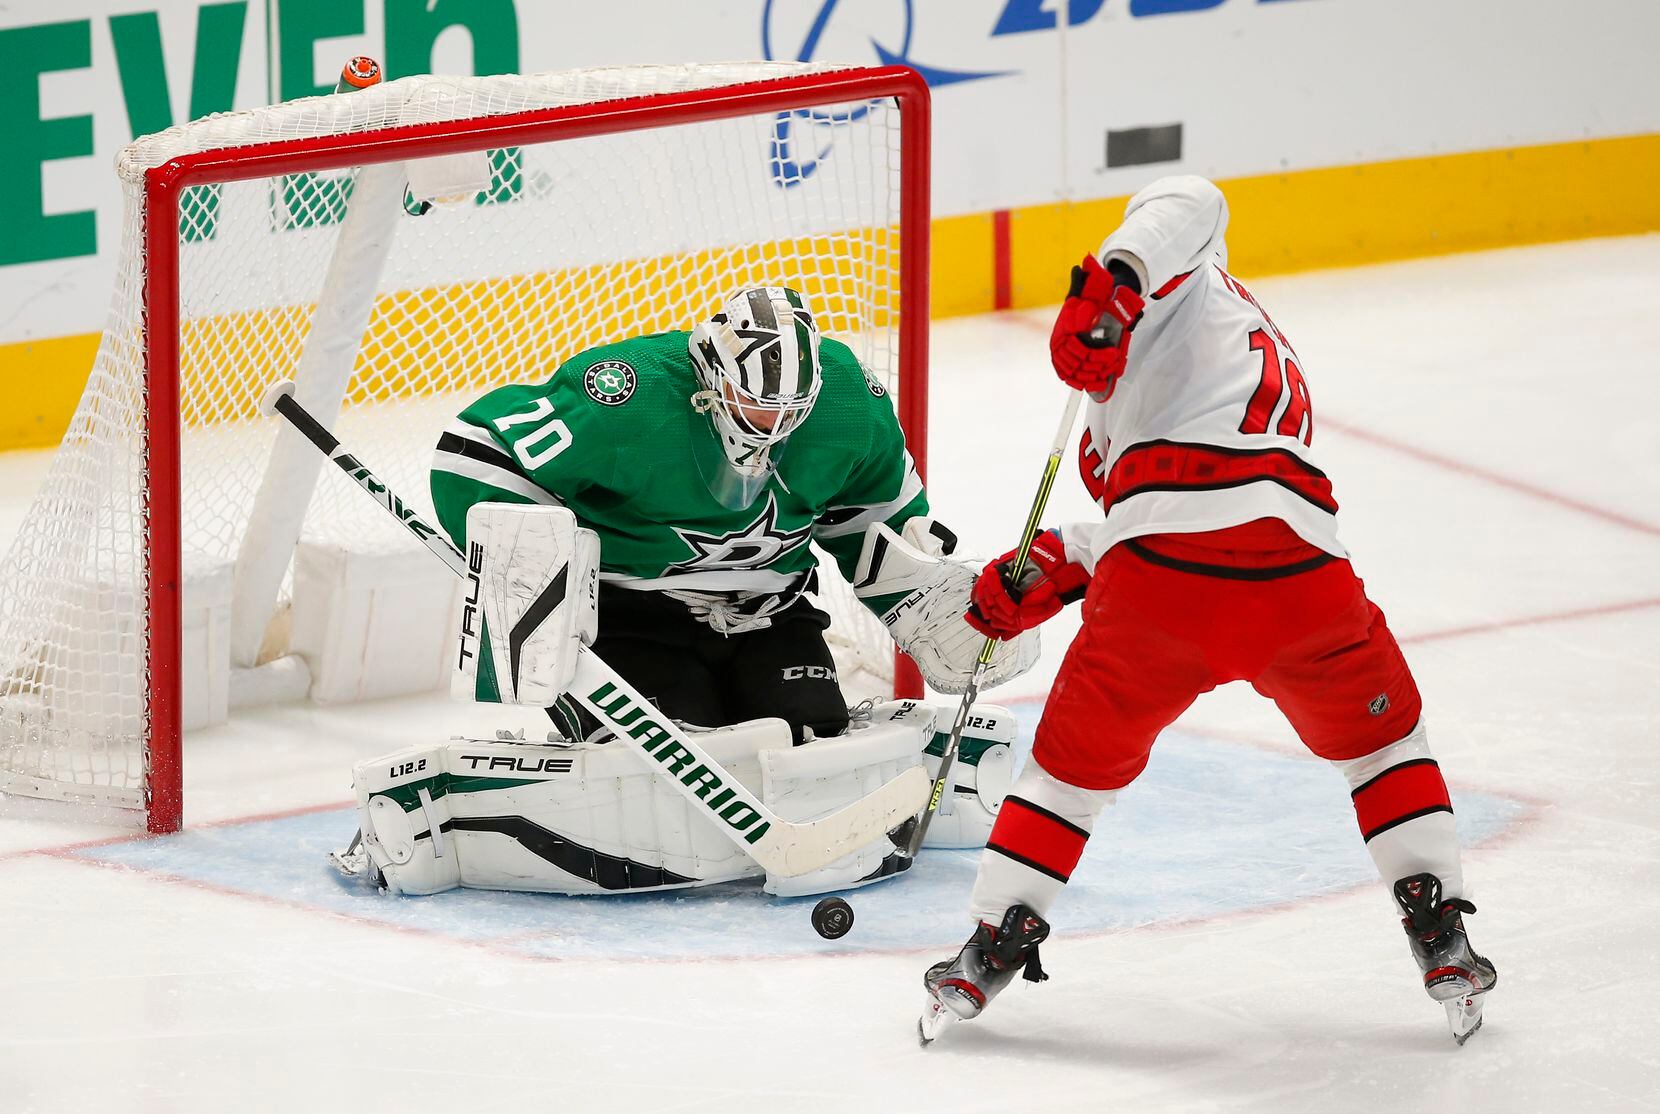 Carolina Hurricanes forward Derek Stepan (18) attempts to play a rebound off of Dallas Stars goaltender Braden Holtby (70) during the second period of an NHL hockey game in Dallas, Tuesday, November 30, 2021. (Brandon Wade/Special Contributor)